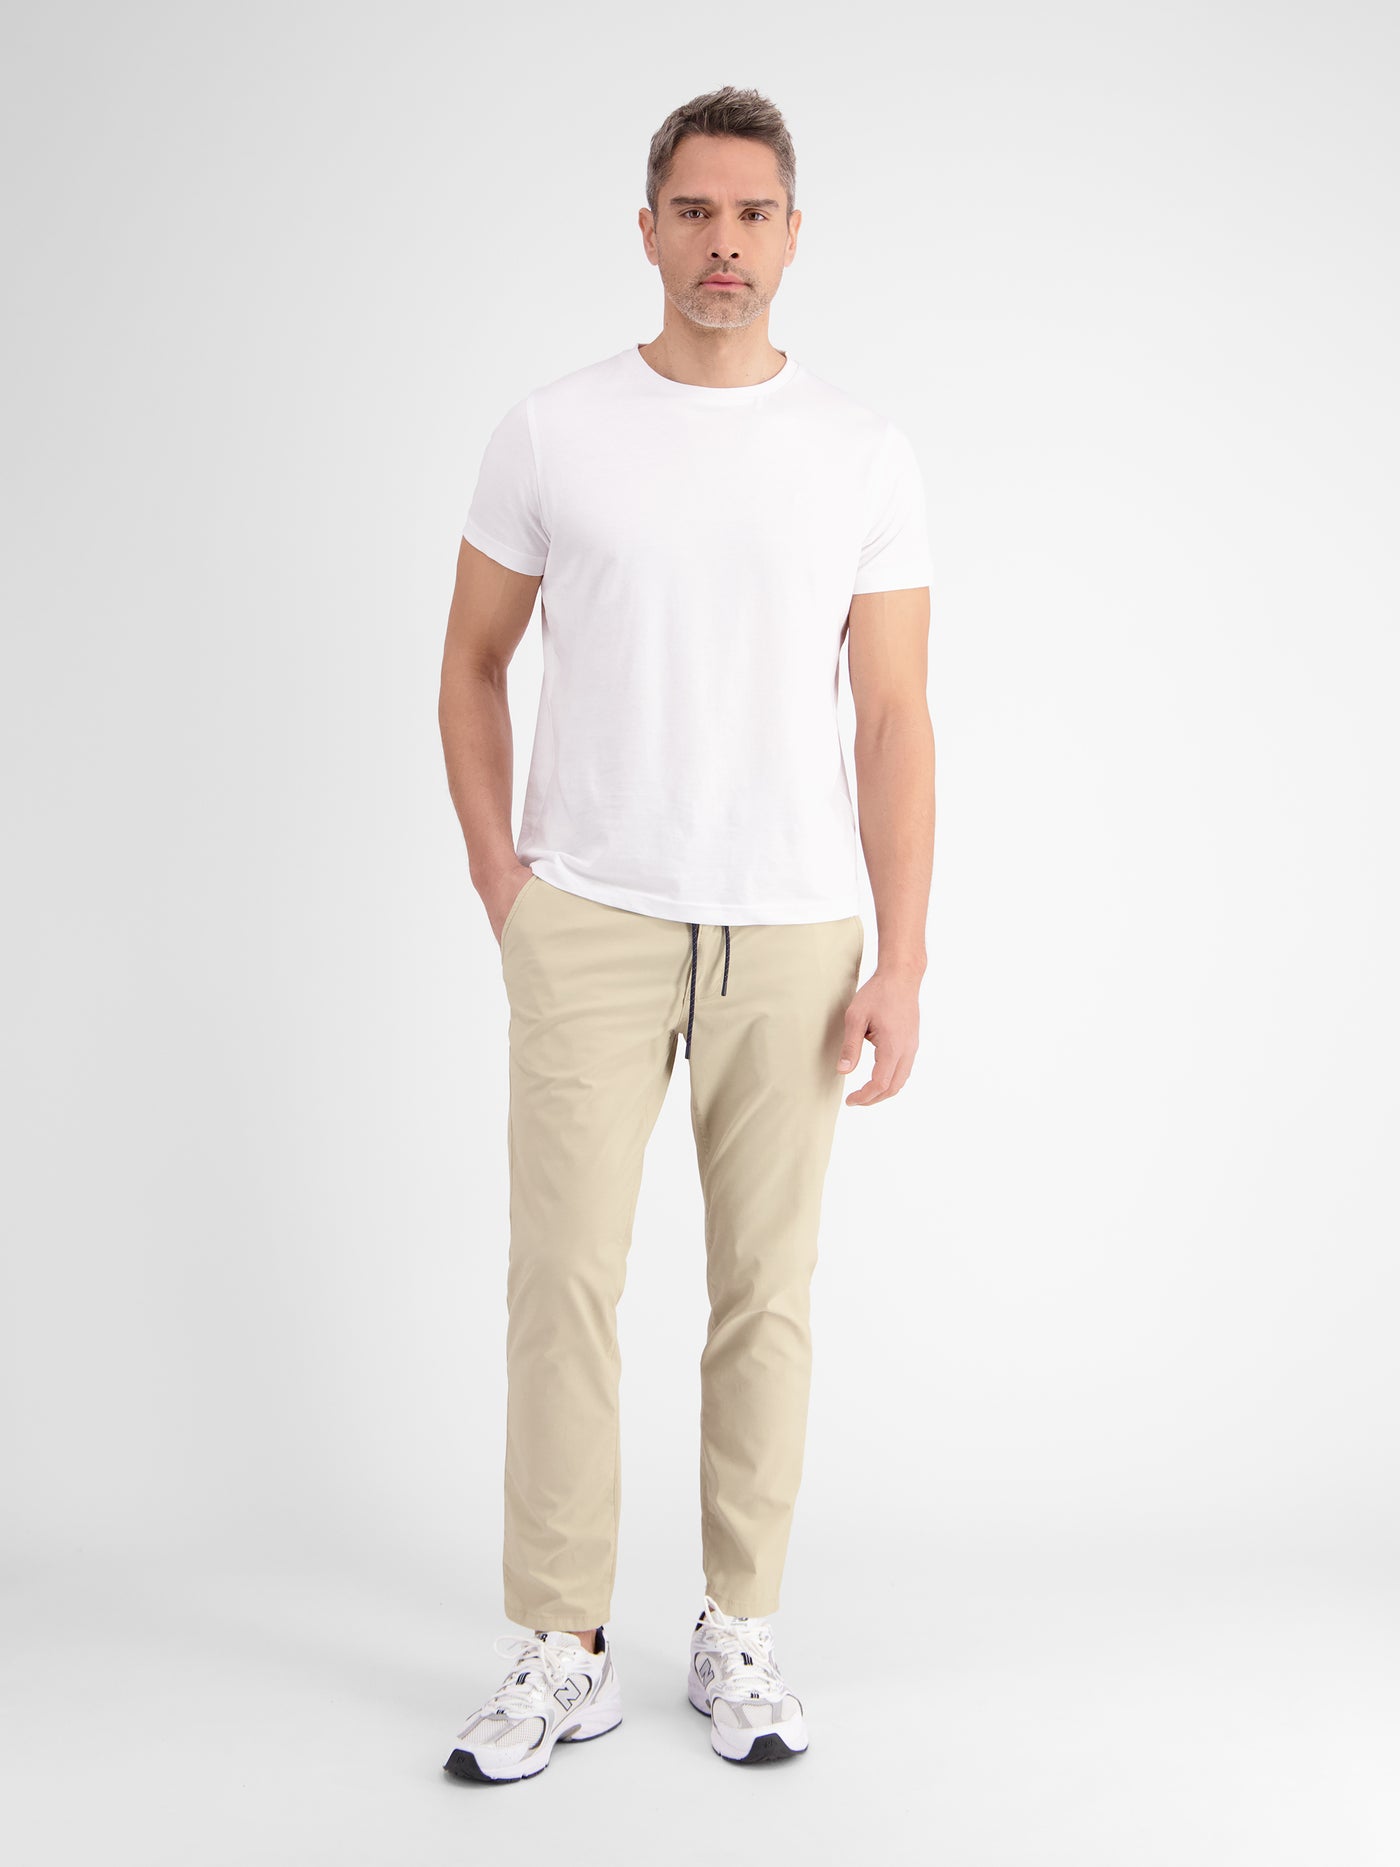 Lightweight hyper-stretch chinos with quick-dry functionality